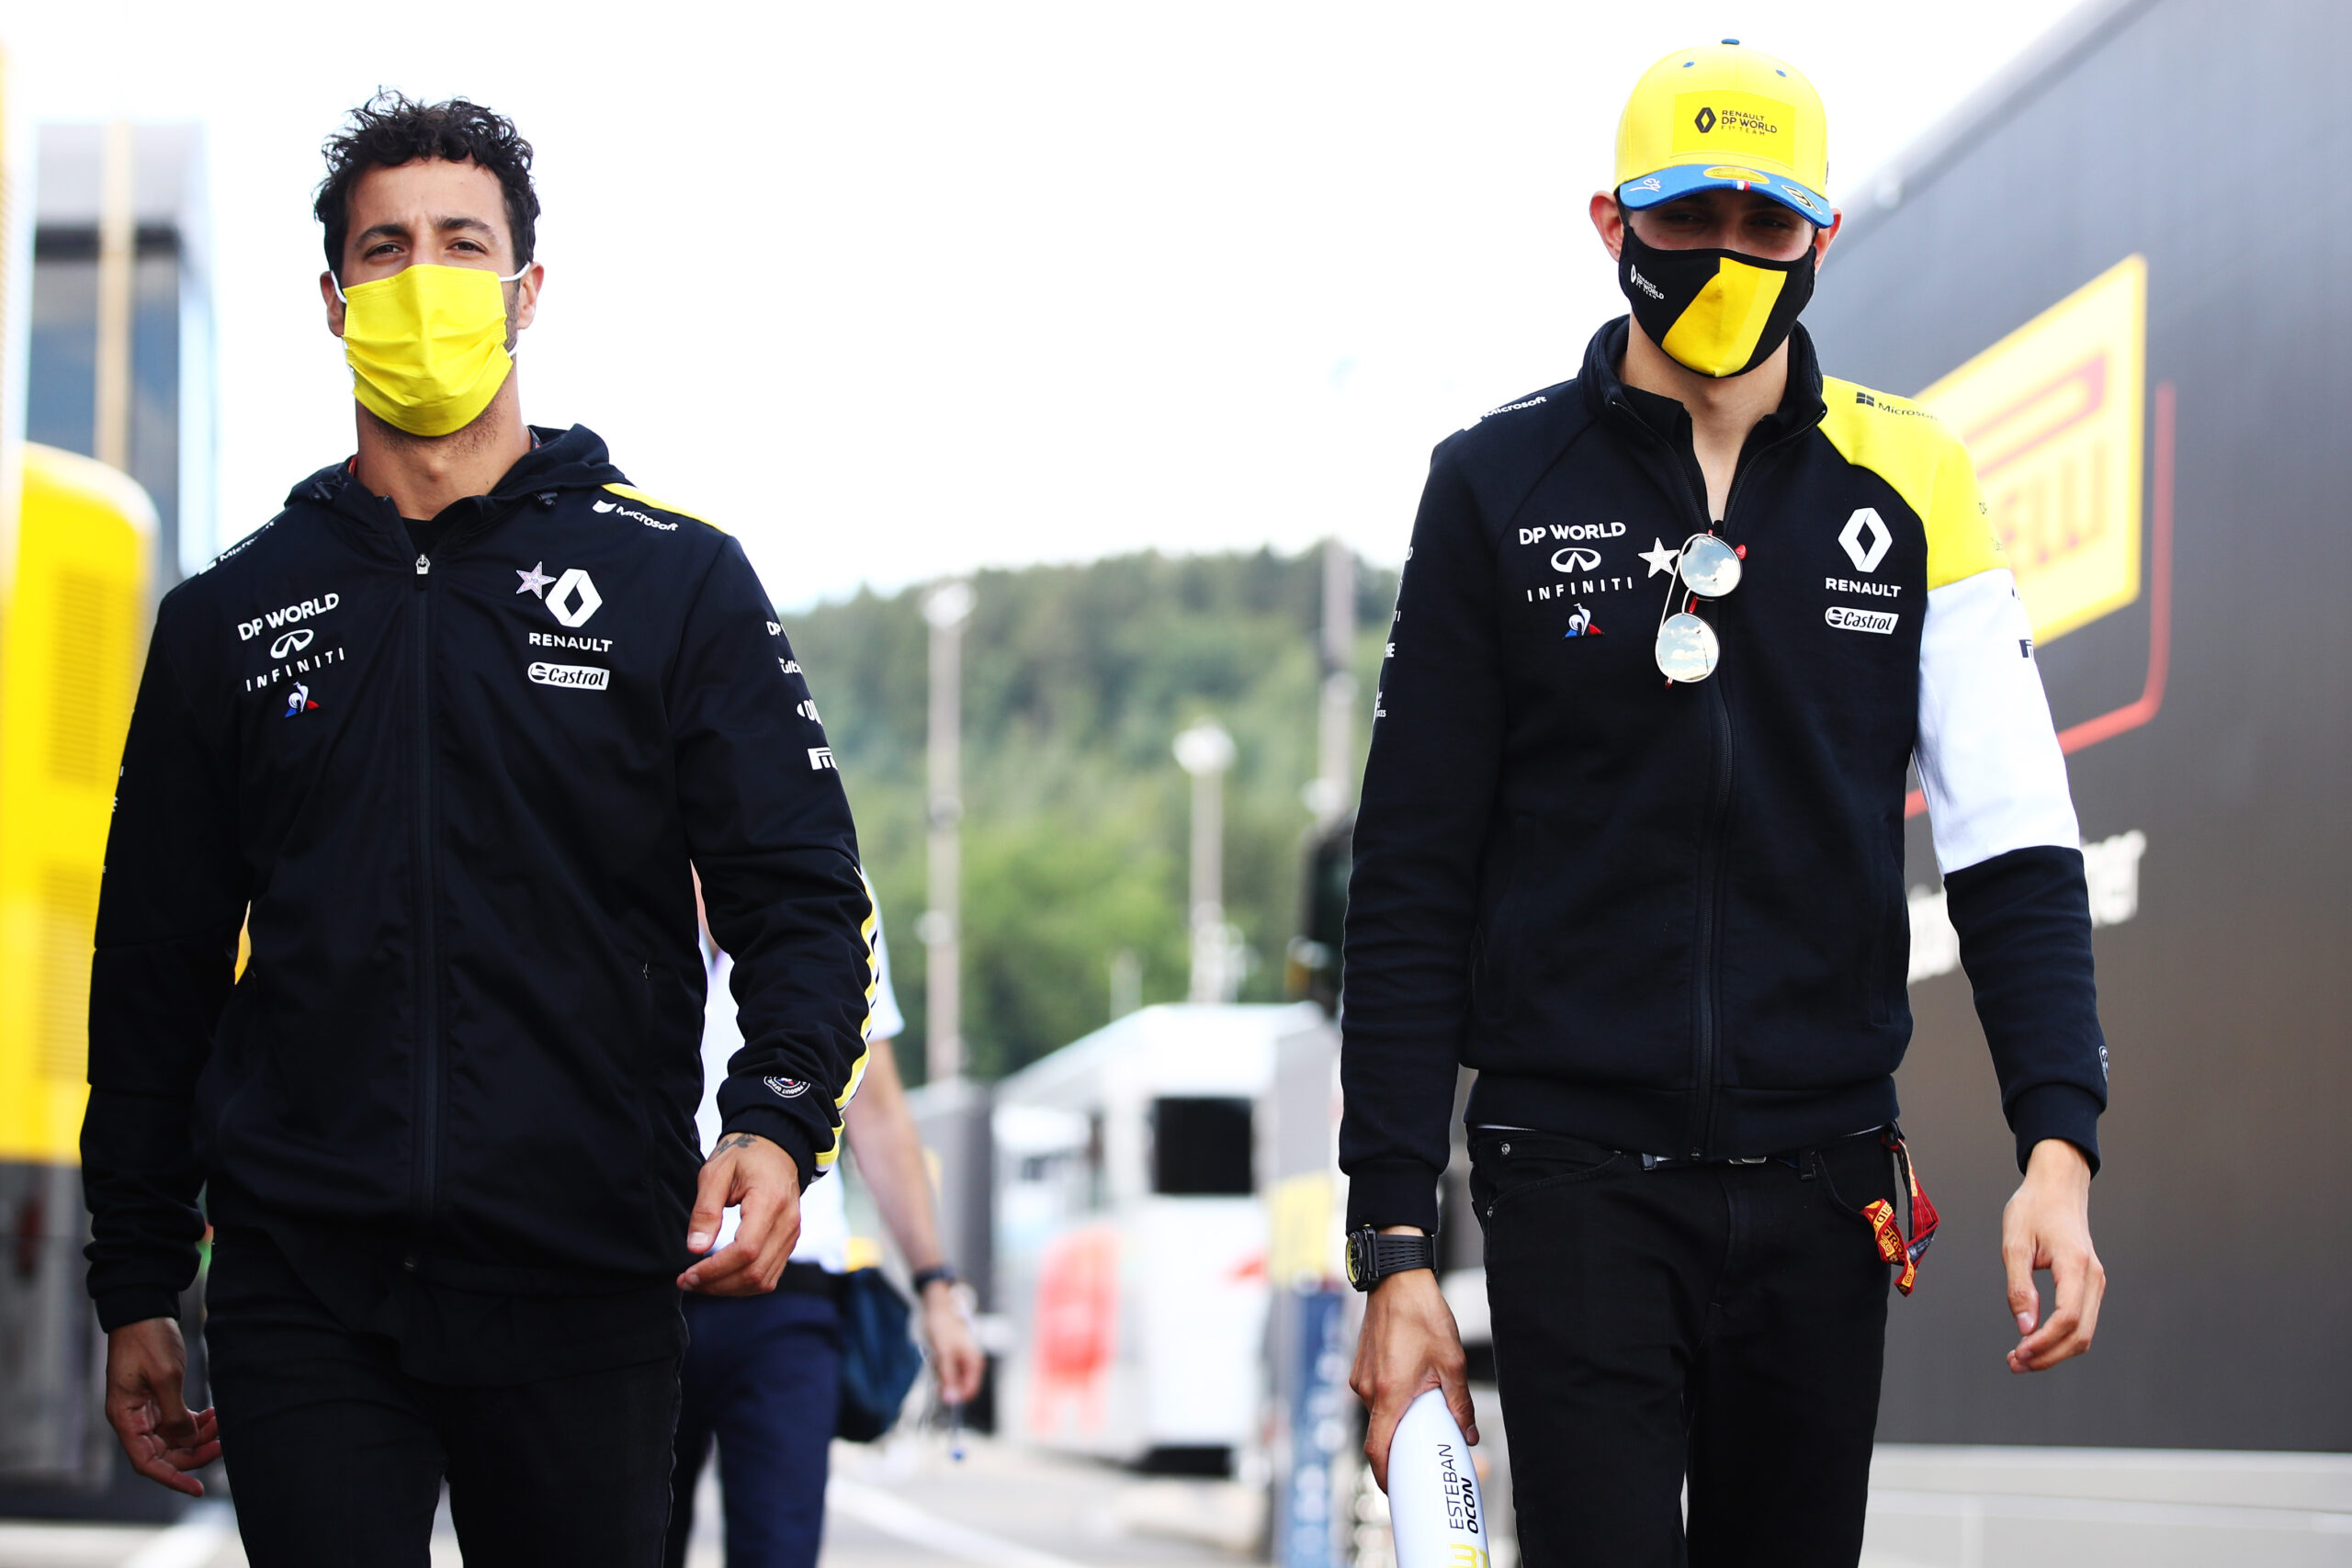 SPA, BELGIUM - AUGUST 27: Daniel Ricciardo of Australia and Renault Sport F1 and Esteban Ocon of France and Renault Sport F1 walk in the paddock during previews ahead of the F1 Grand Prix of Belgium at Circuit de Spa-Francorchamps on August 27, 2020 in Spa, Belgium. (Photo by Mark Thompson/Getty Images)